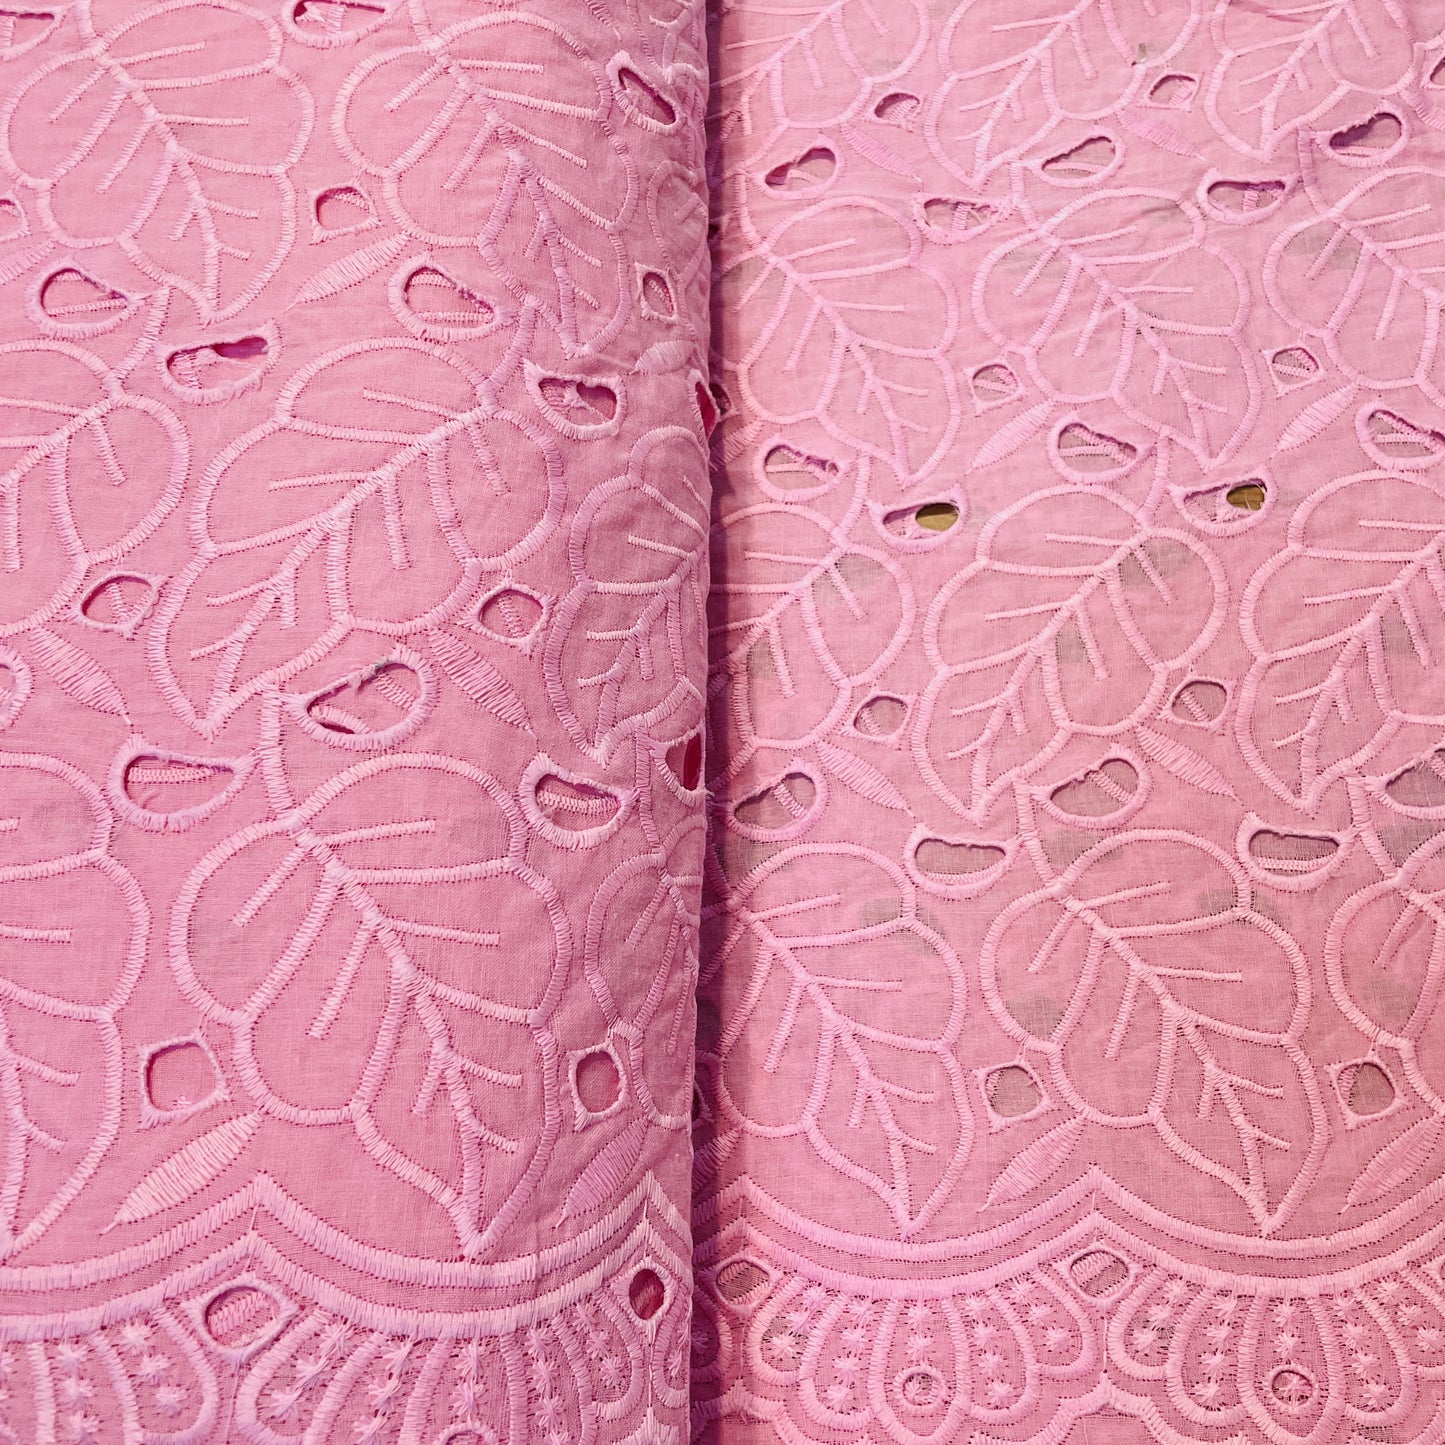 Premium Pink Floral Leaves Embroidery Cotton Schiffli Fabric